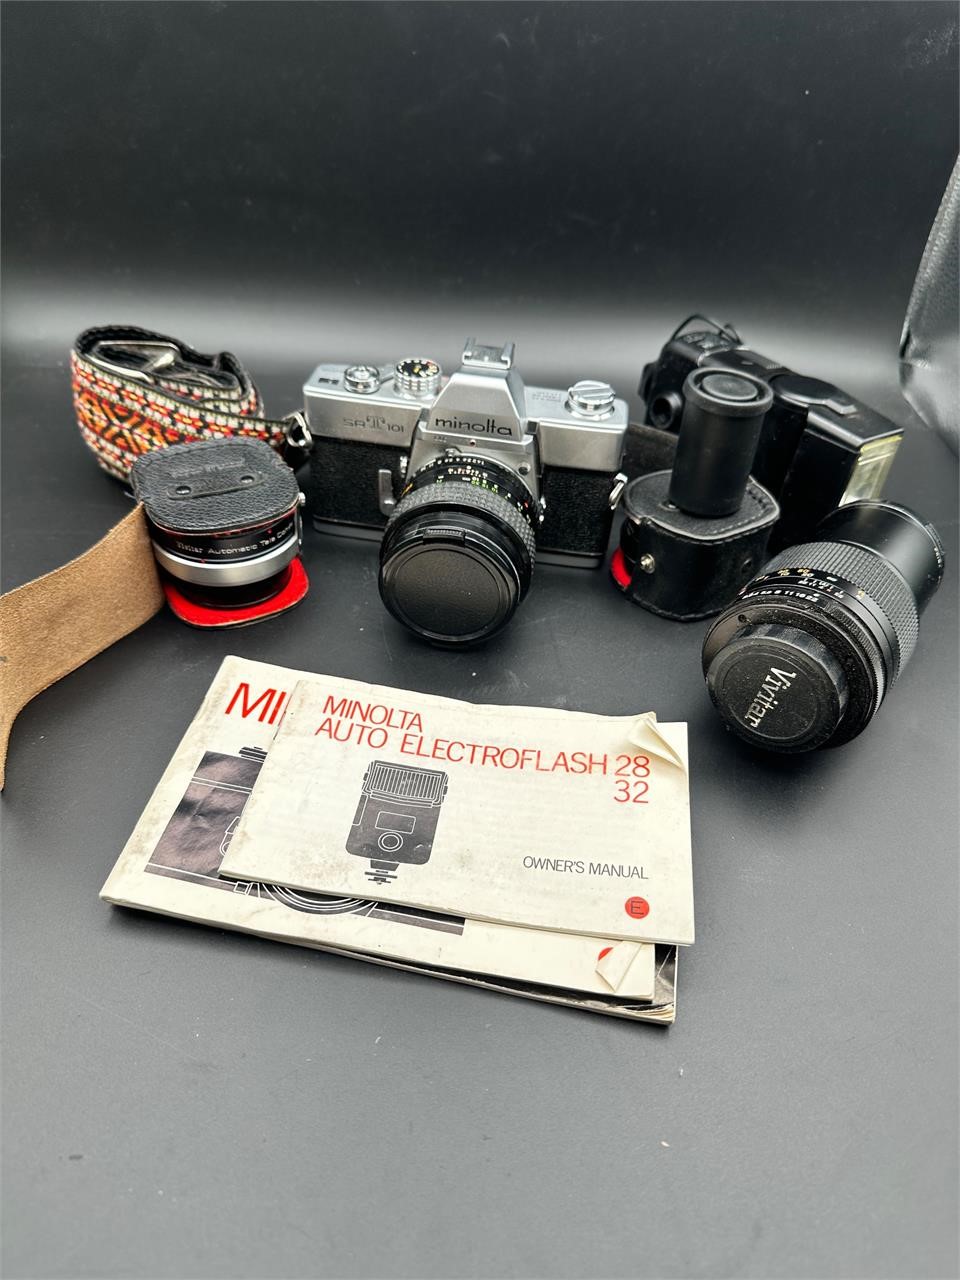 Vintage Minolta Camera with Lenses and Accessories